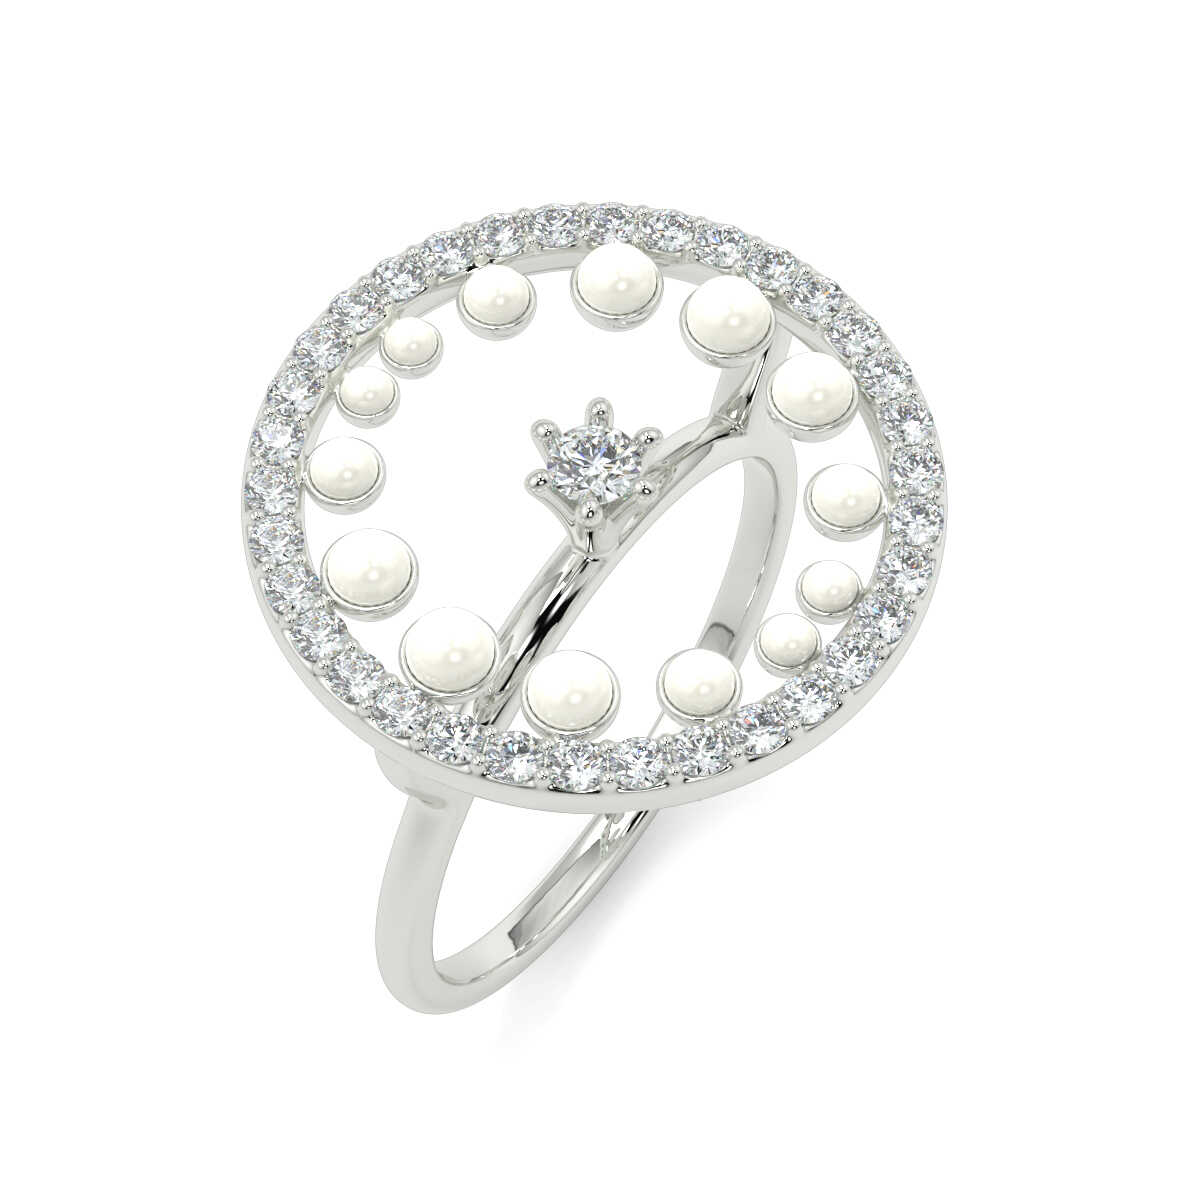 Wanning Pearl Ring
